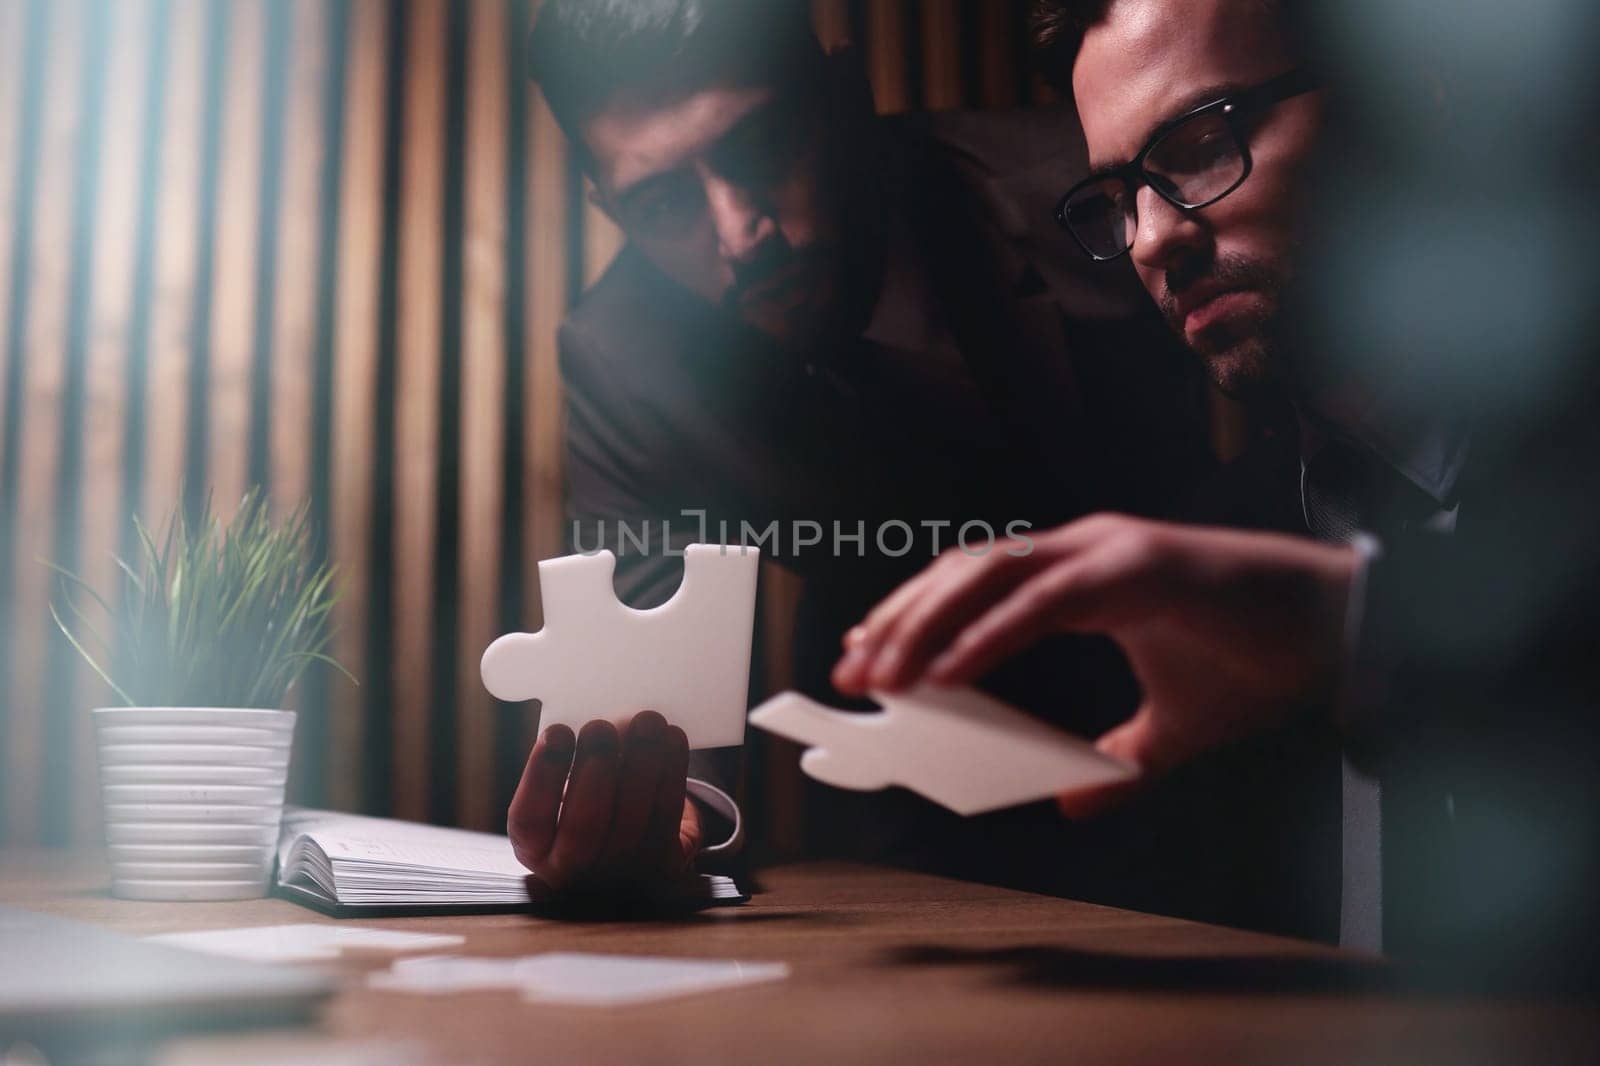 Business teamwork with white puzzle pieces cooperation